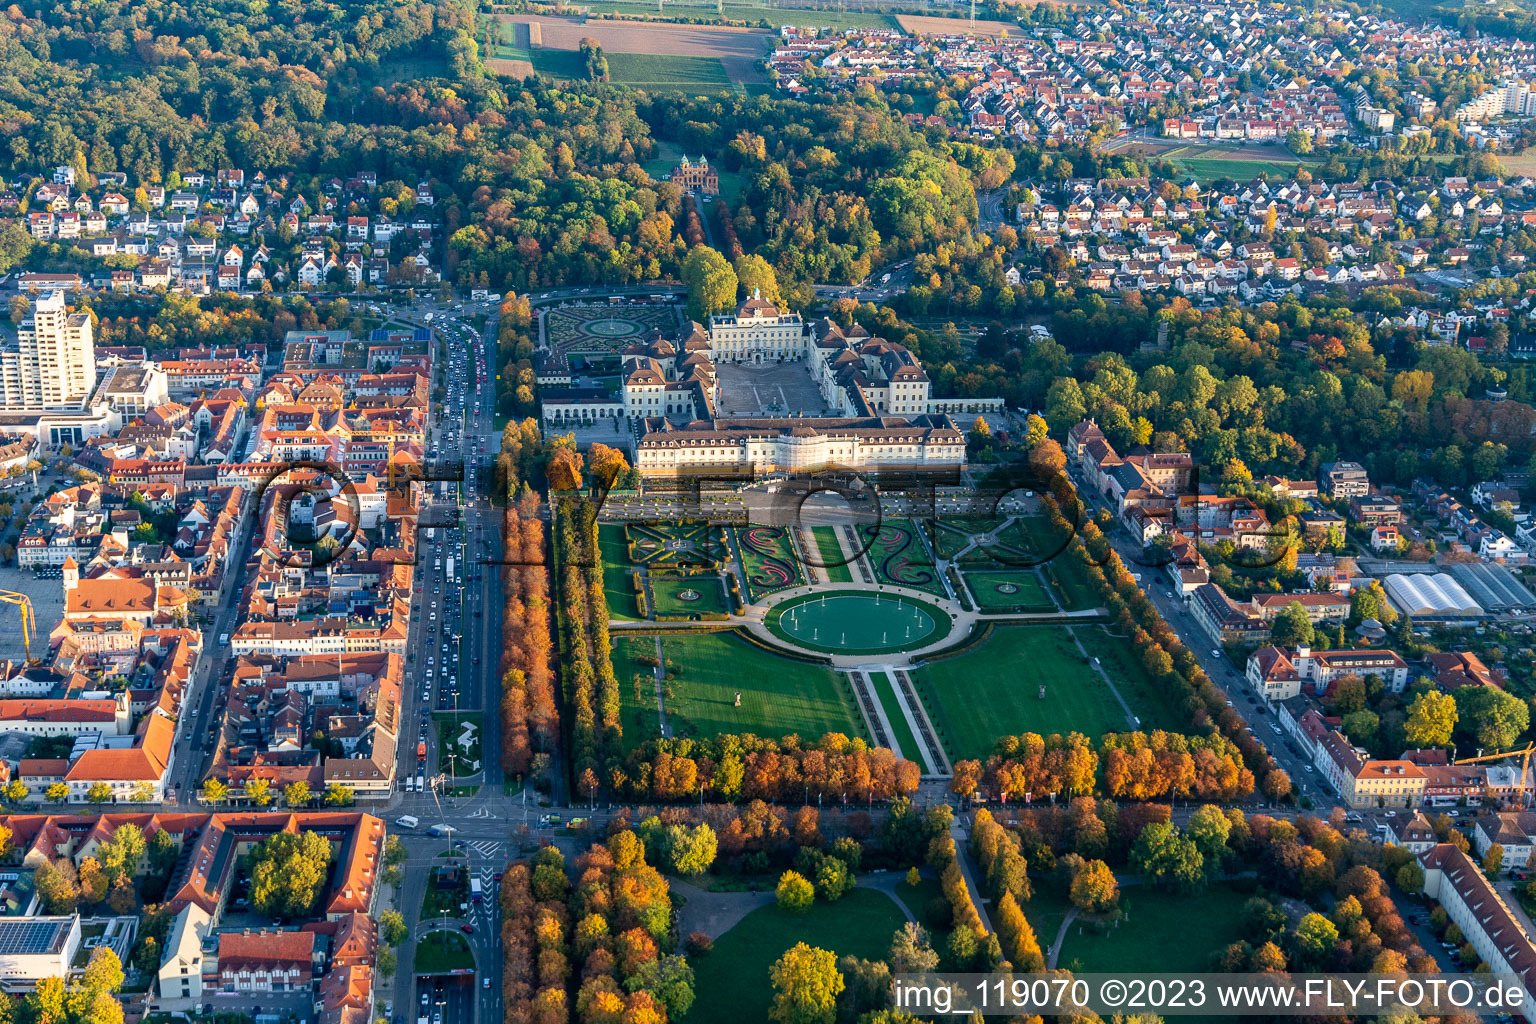 Aerial view of Building complex in the park of the castle Residenzschloss Ludwigsburg and Gartenschau Bluehendes Barock in Ludwigsburg in the state Baden-Wurttemberg, Germany